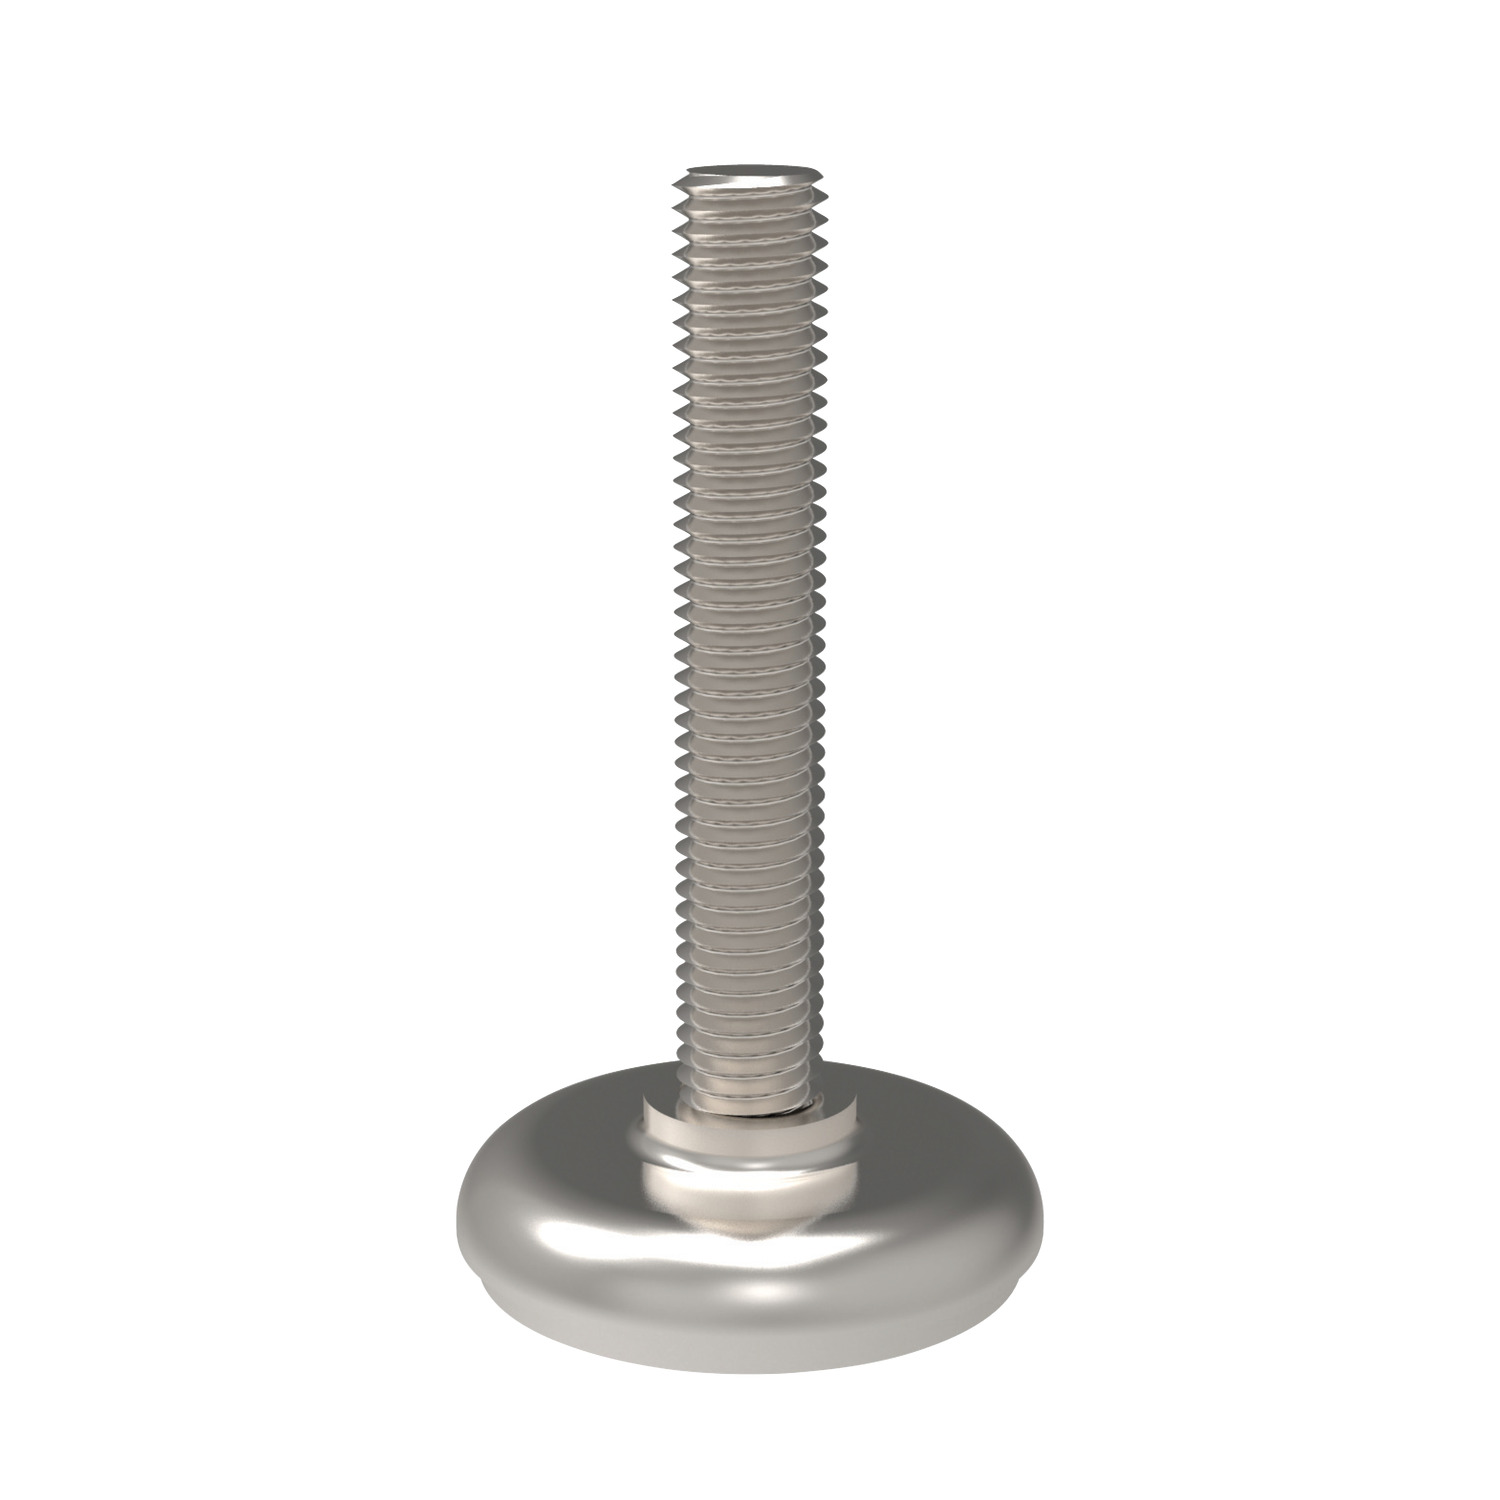 Product 34780, Machine Feet - Low Profile pad and bolt stainless steel / 